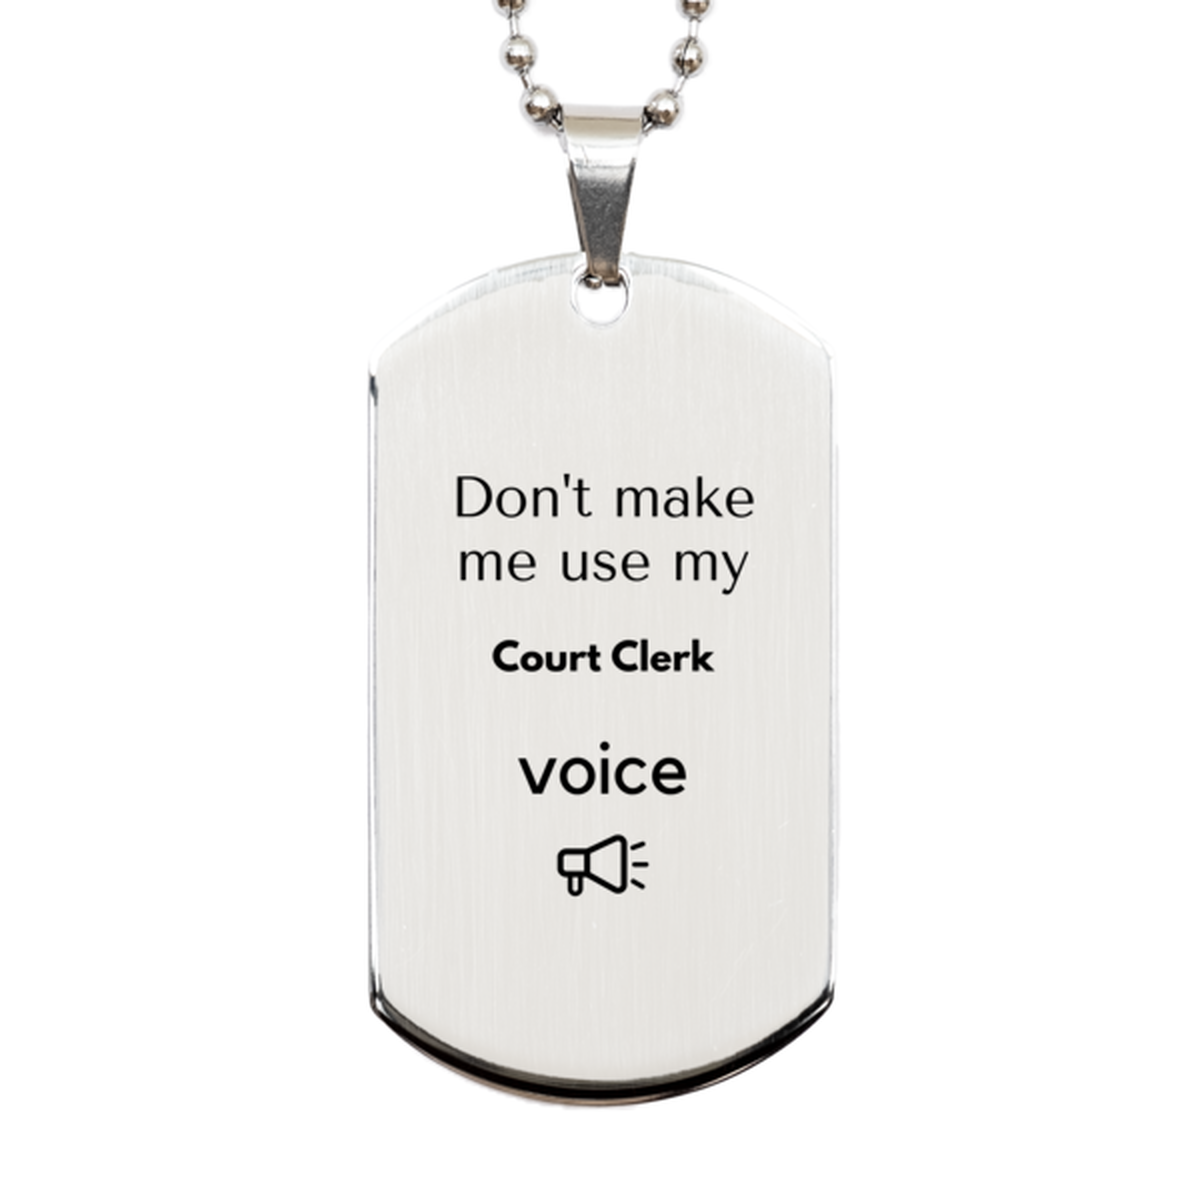 Don't make me use my Court Clerk voice, Sarcasm Court Clerk Gifts, Christmas Court Clerk Silver Dog Tag Birthday Unique Gifts For Court Clerk Coworkers, Men, Women, Colleague, Friends